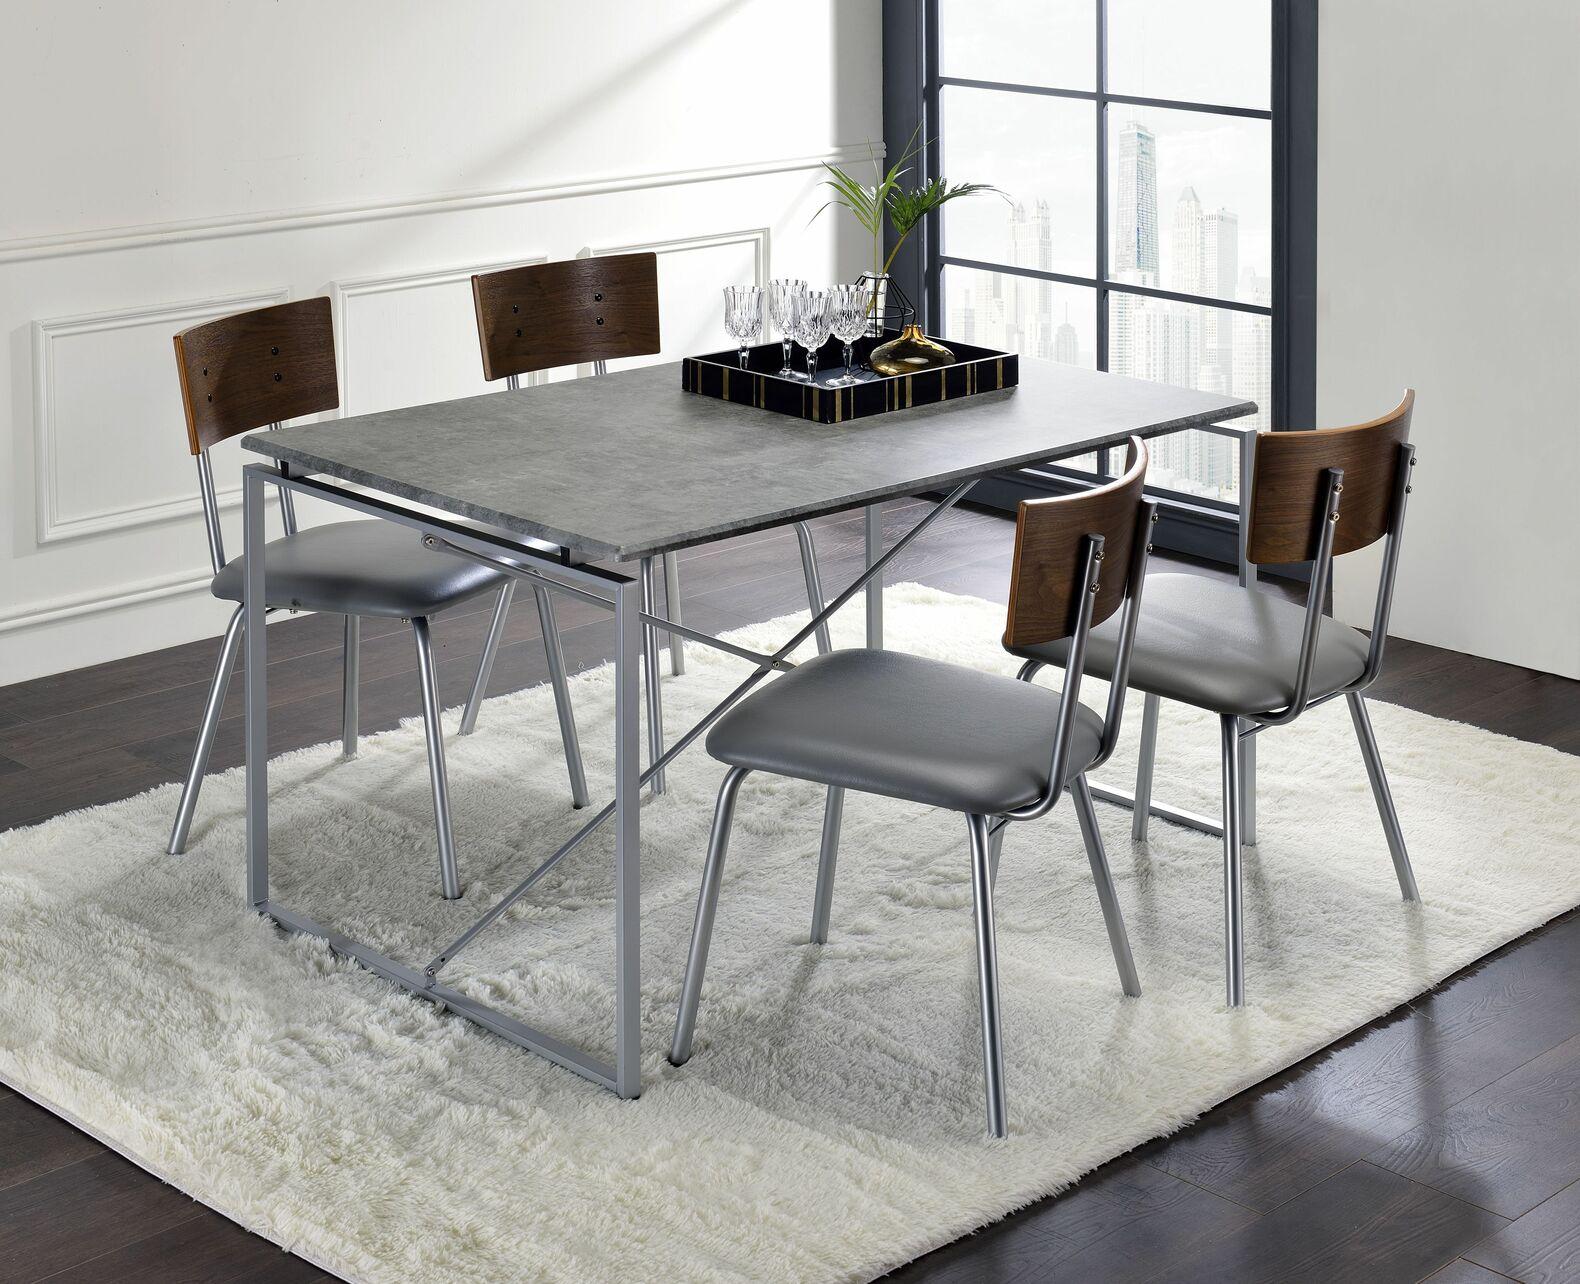 

    
Transitional Faux Concrete & Silver Dining Table + 4x Chairs by Acme Jurgen 72905-5pcs
